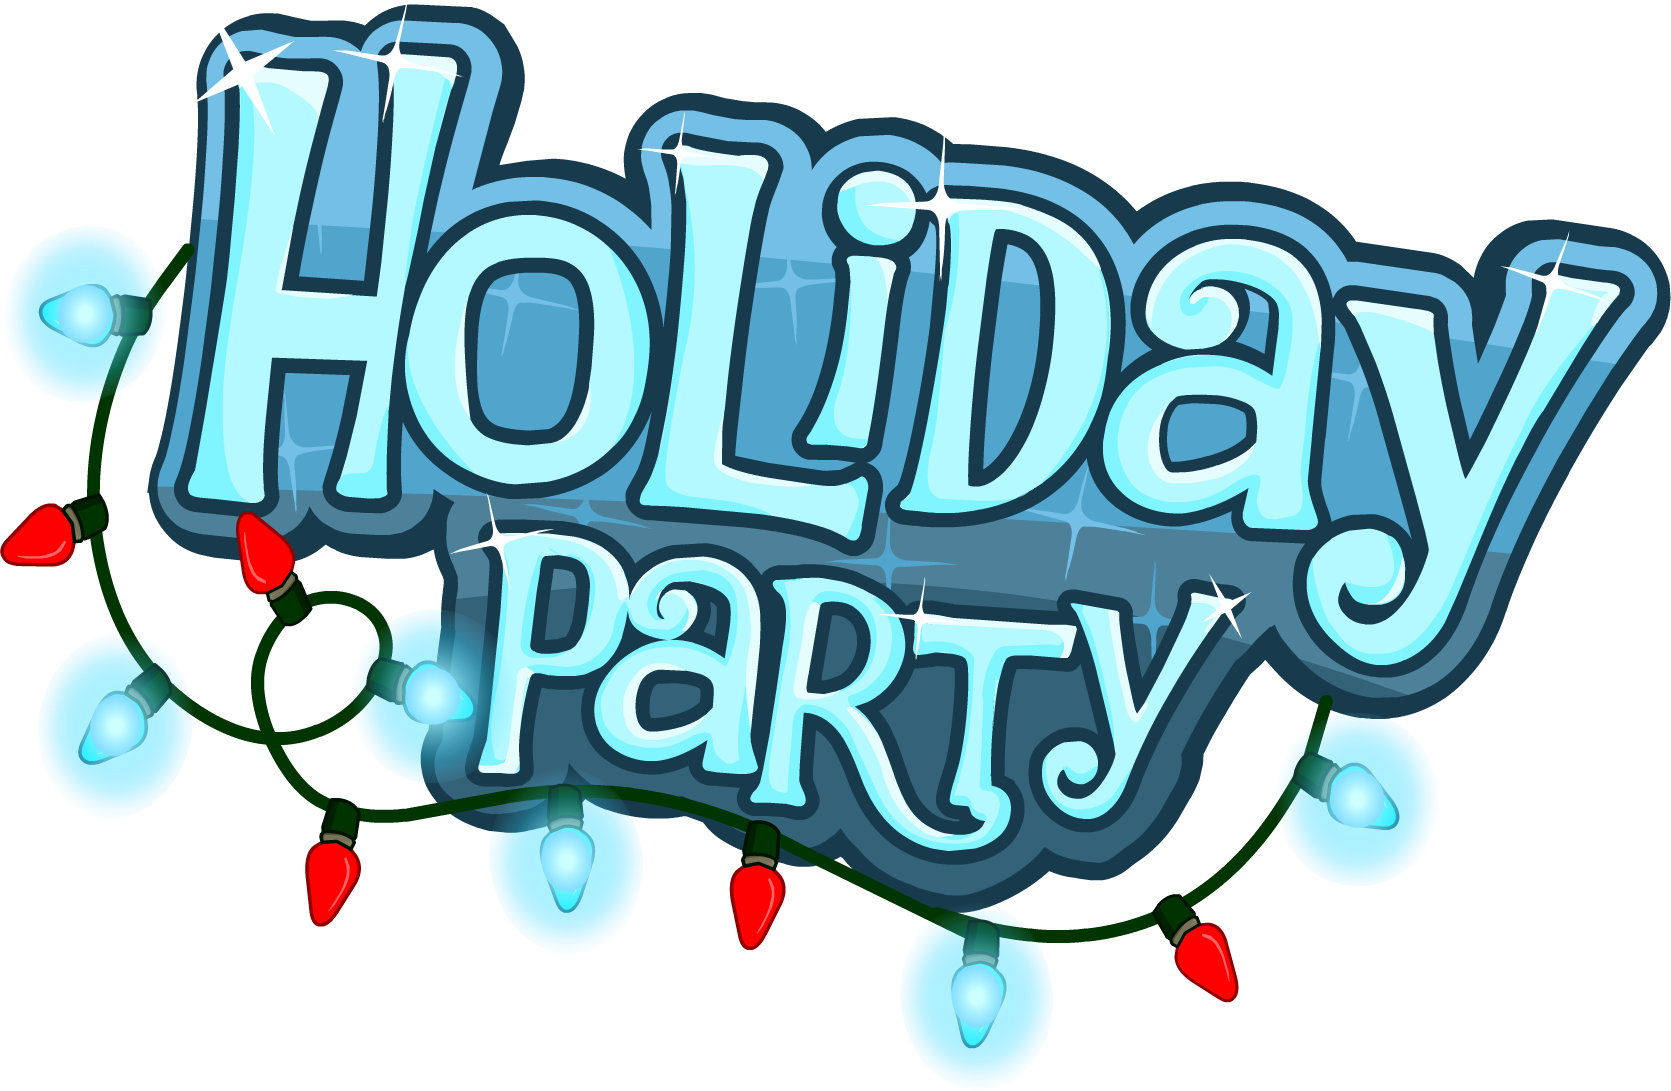 Florida clipart logo. Holiday party out sober